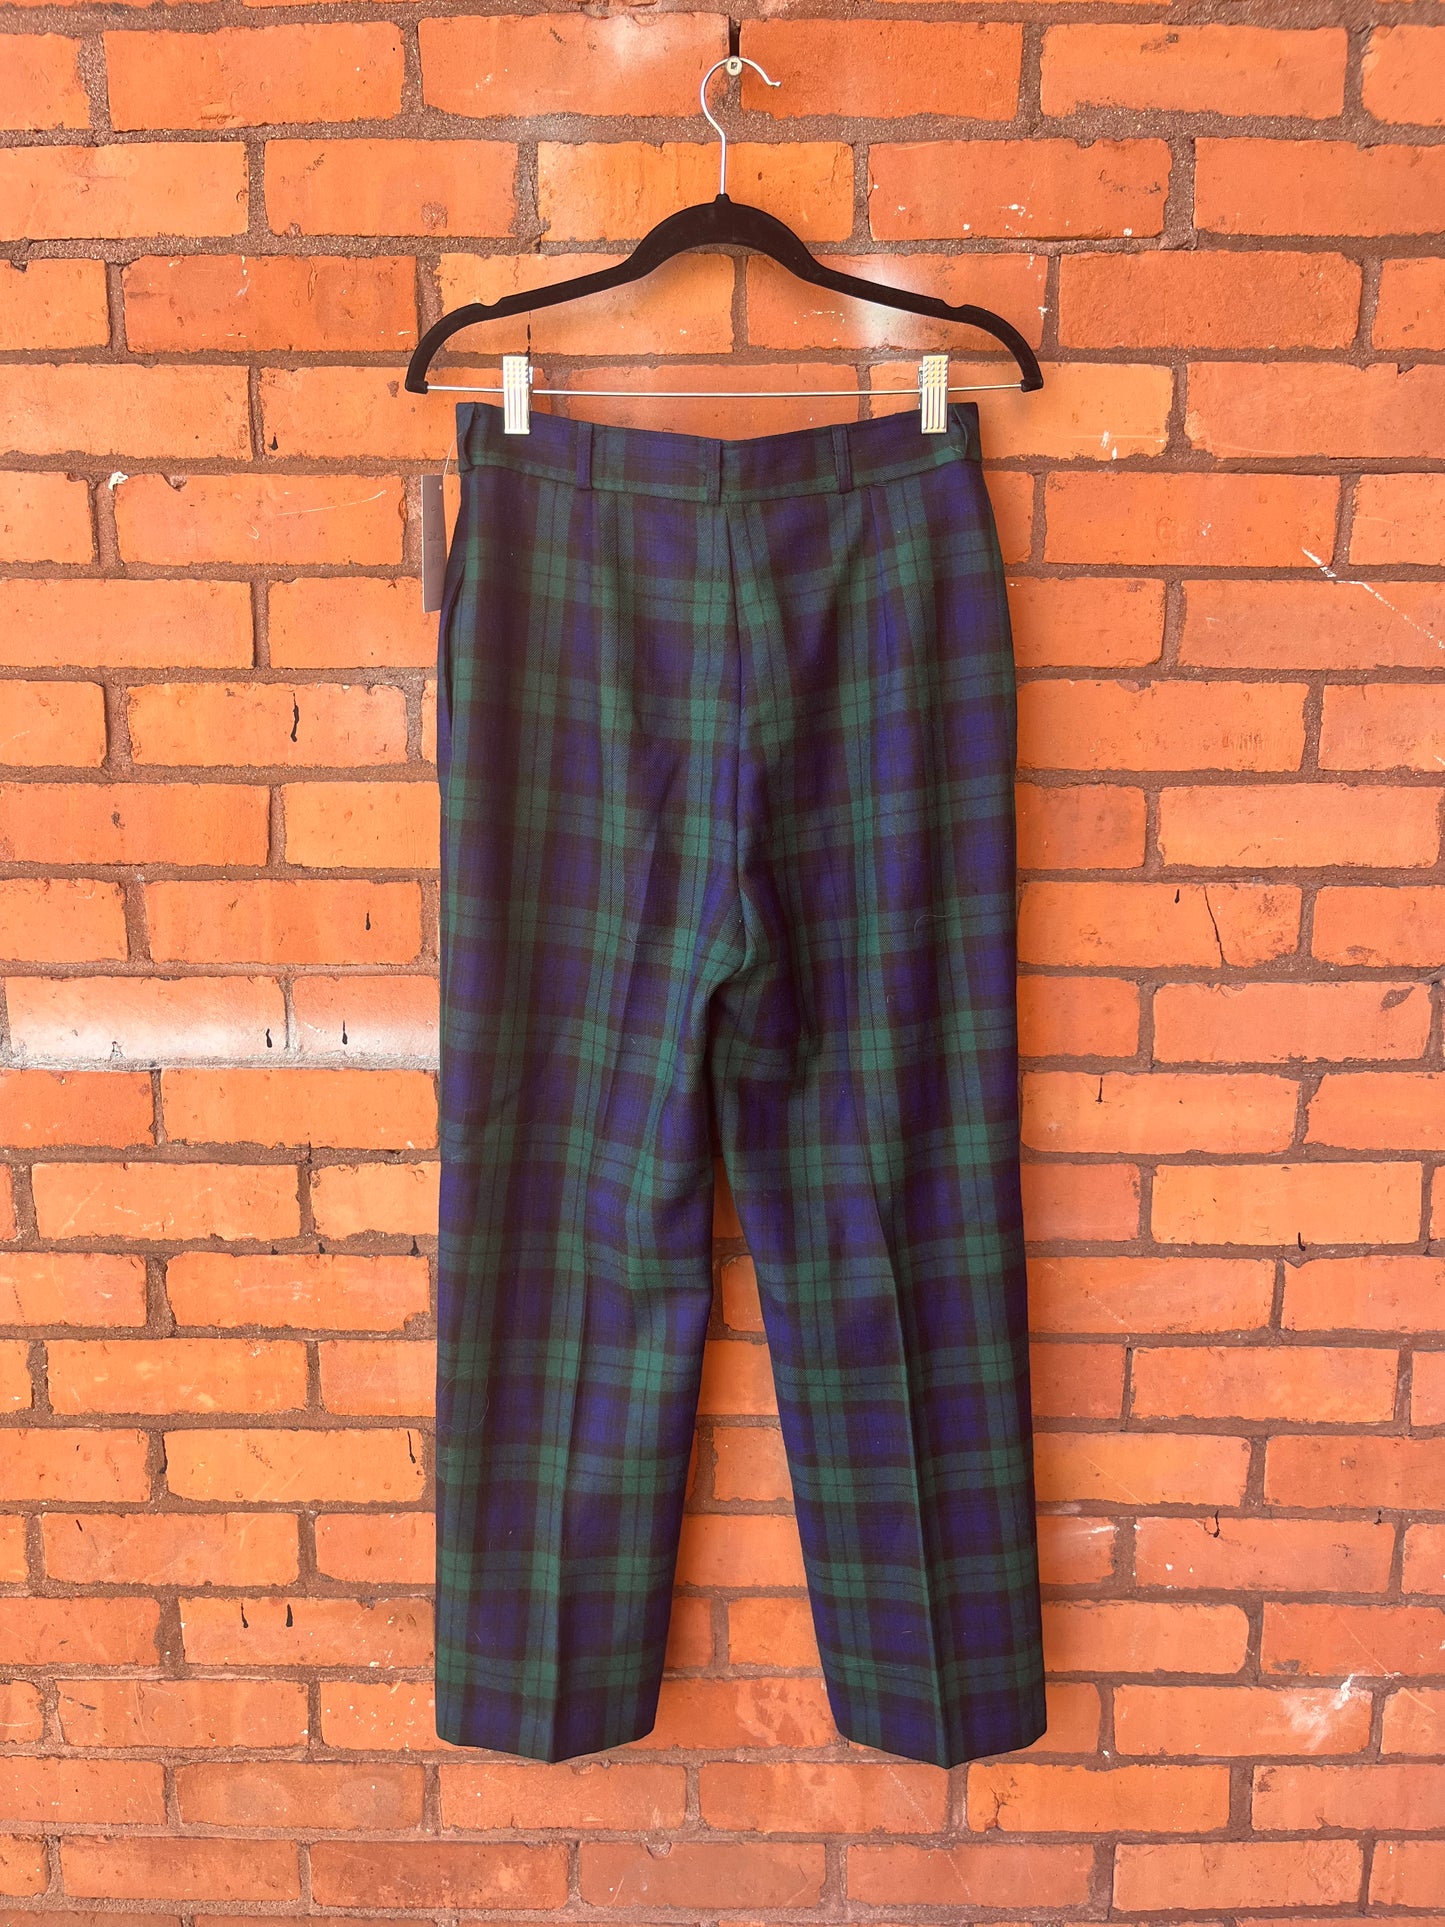 90’s Vintage Green & Navy Plaid Wool Trousers / 29 Waist